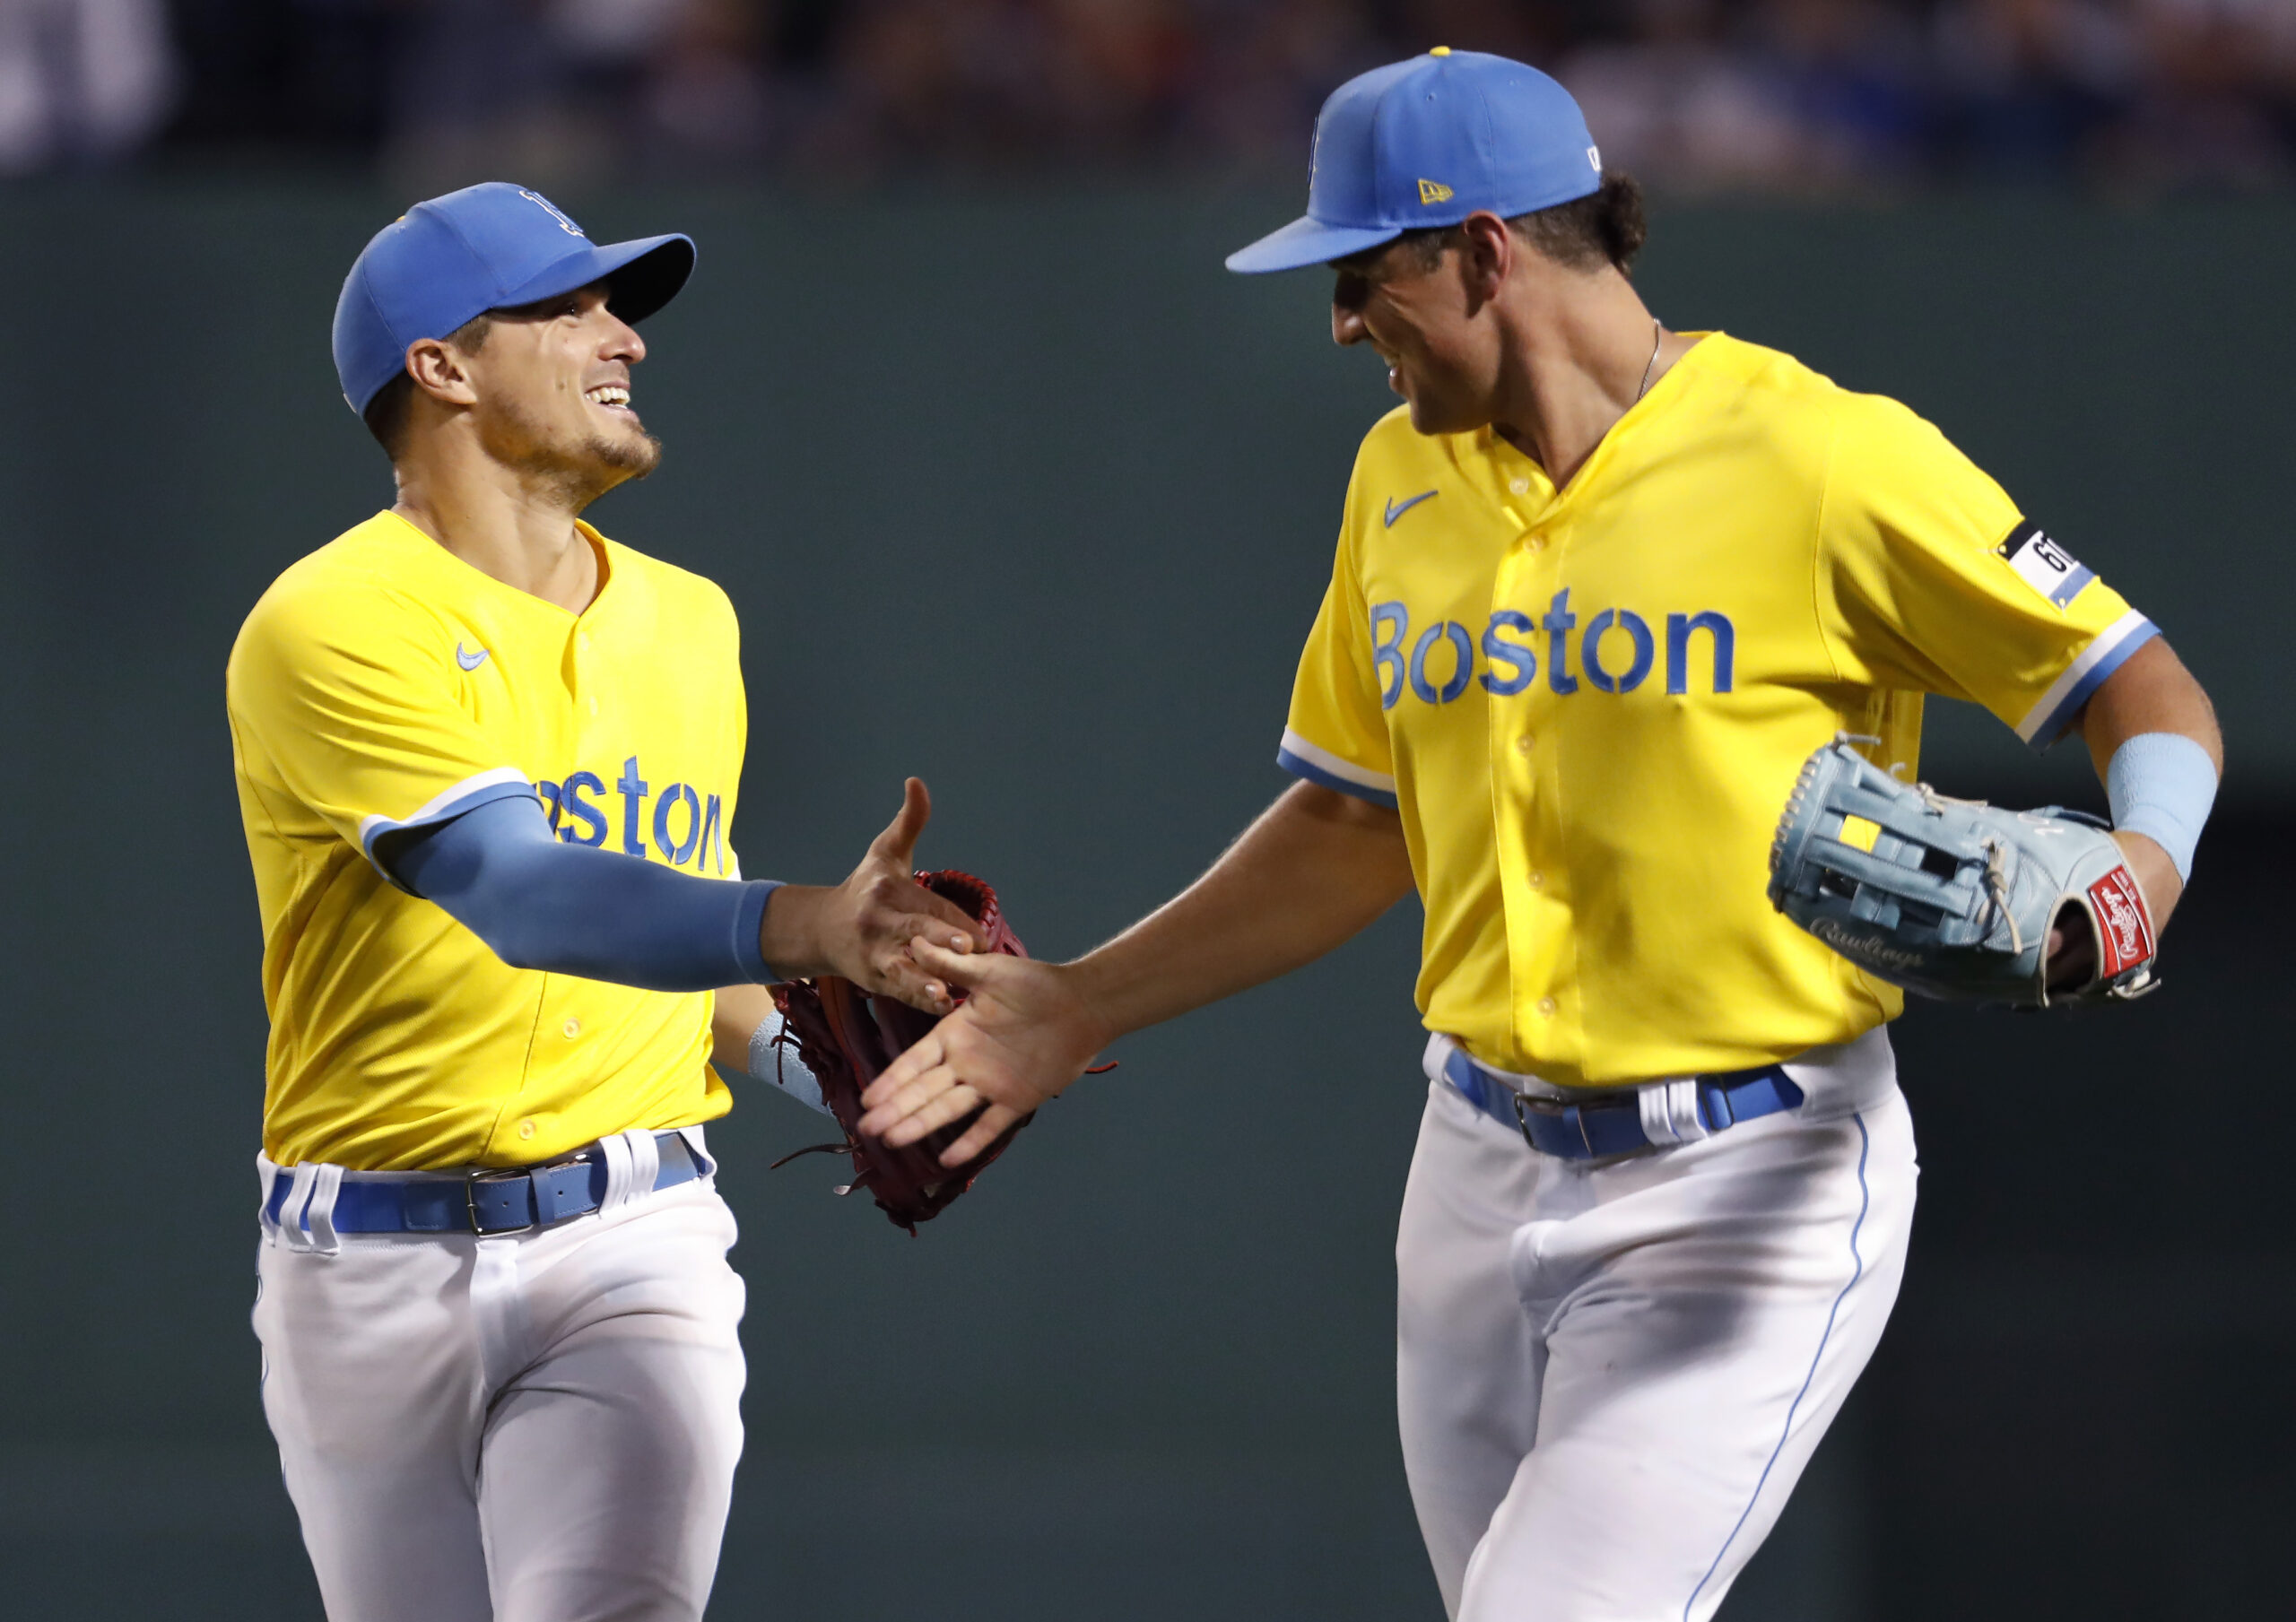 Why Is Boston Red Sox Wearing Yellow